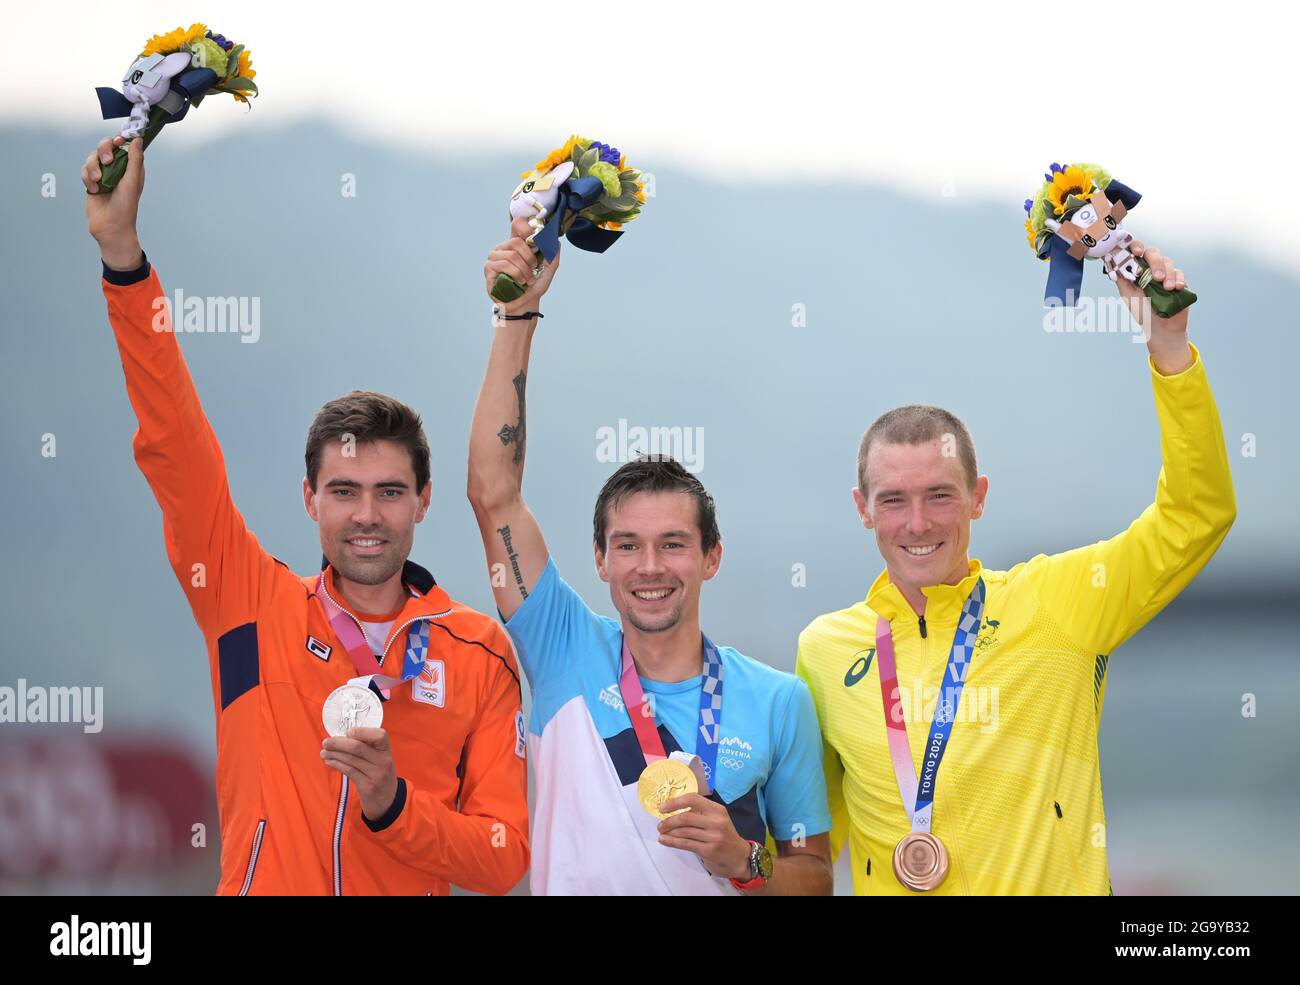 Oyama, Japan. 28th July, 2021. Cycling: Olympics, Oyama (44.20km), men's individual time trial at Fuji International Speedway. Primoz Roglic (M) of Slovenia celebrates his gold medal with silver medallist Tom Dumoulin (l) of the Netherlands and bronze medallist Rohan Dennis of Australia at the award ceremony. Credit: Sebastian Gollnow/dpa/Alamy Live News Stock Photo